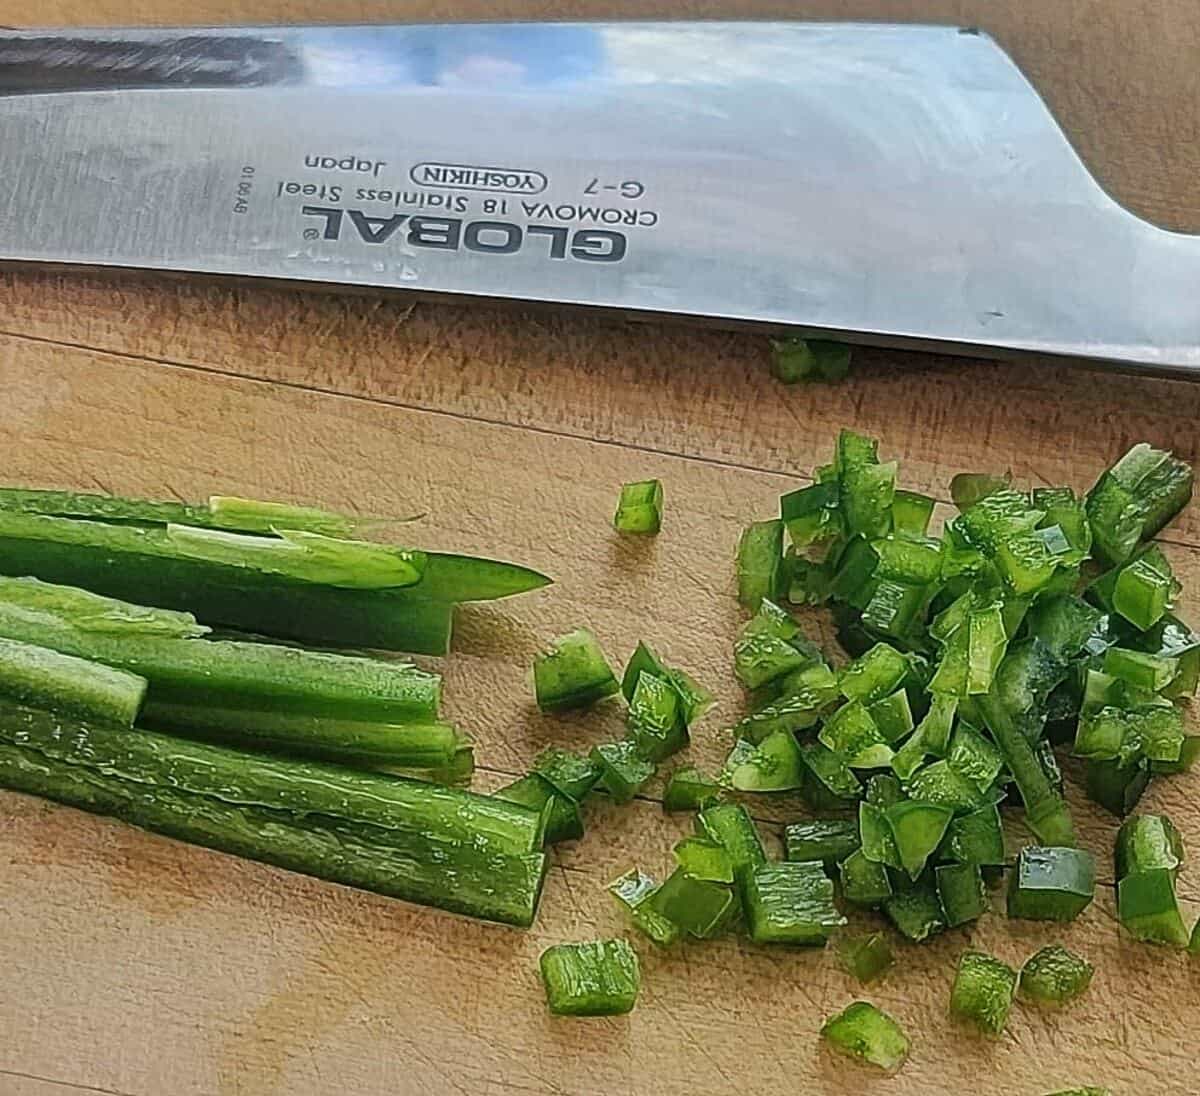 cored jalapeno, sliced into thin strips, and then again into very small dice, knife shown in background.